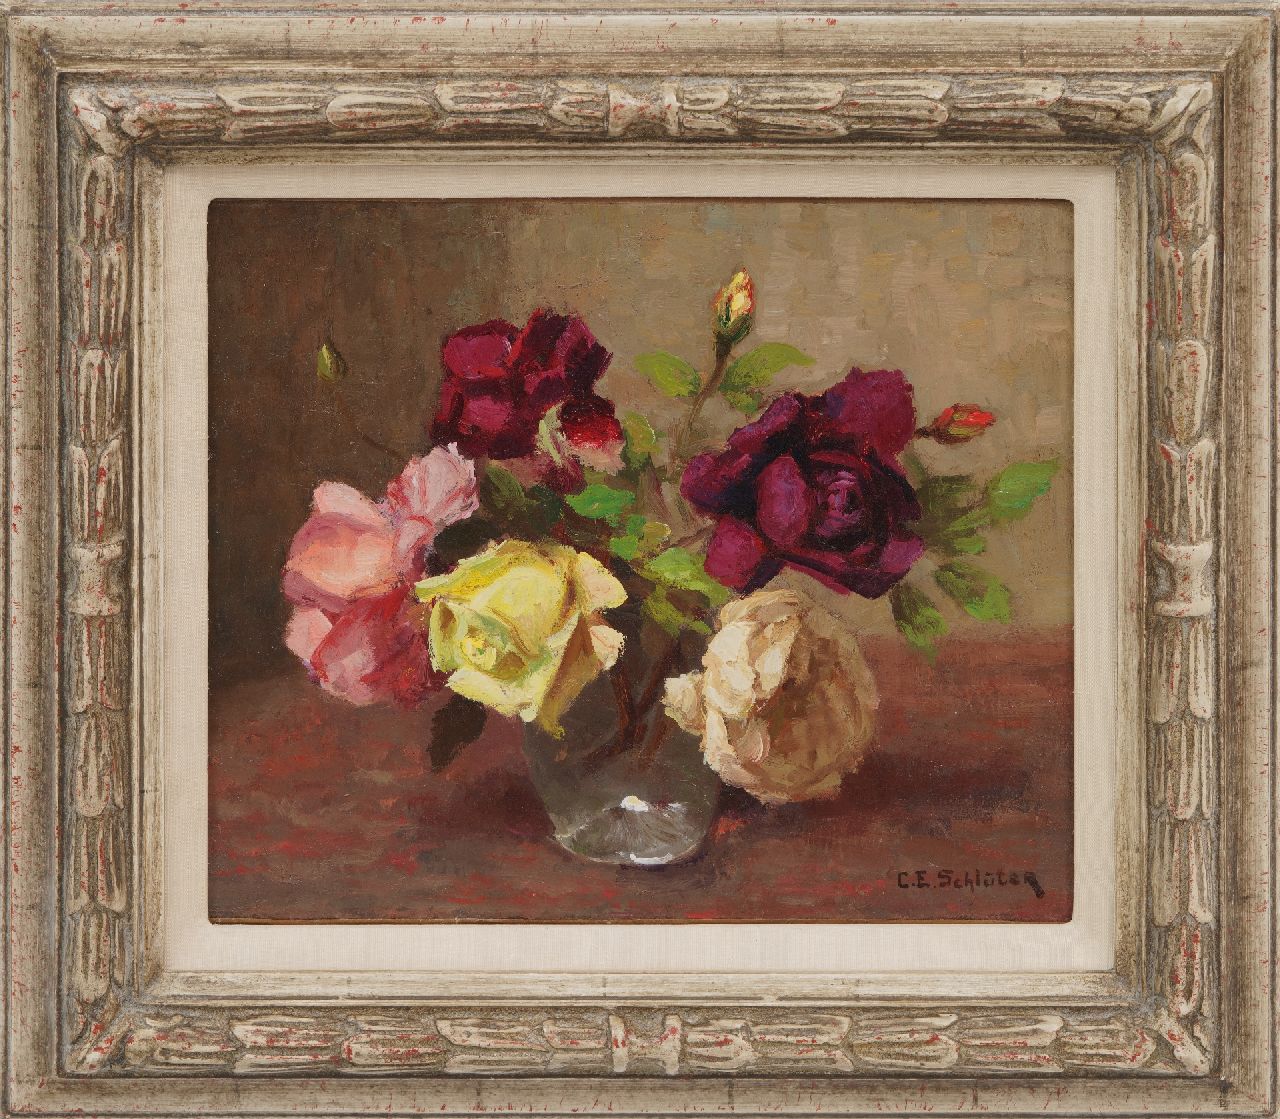 Schlüter C.A.  | 'Carl' Eberhard Schlüter | Paintings offered for sale | Roses in a glass vase, oil on canvas 25.6 x 30.5 cm, signed l.r.